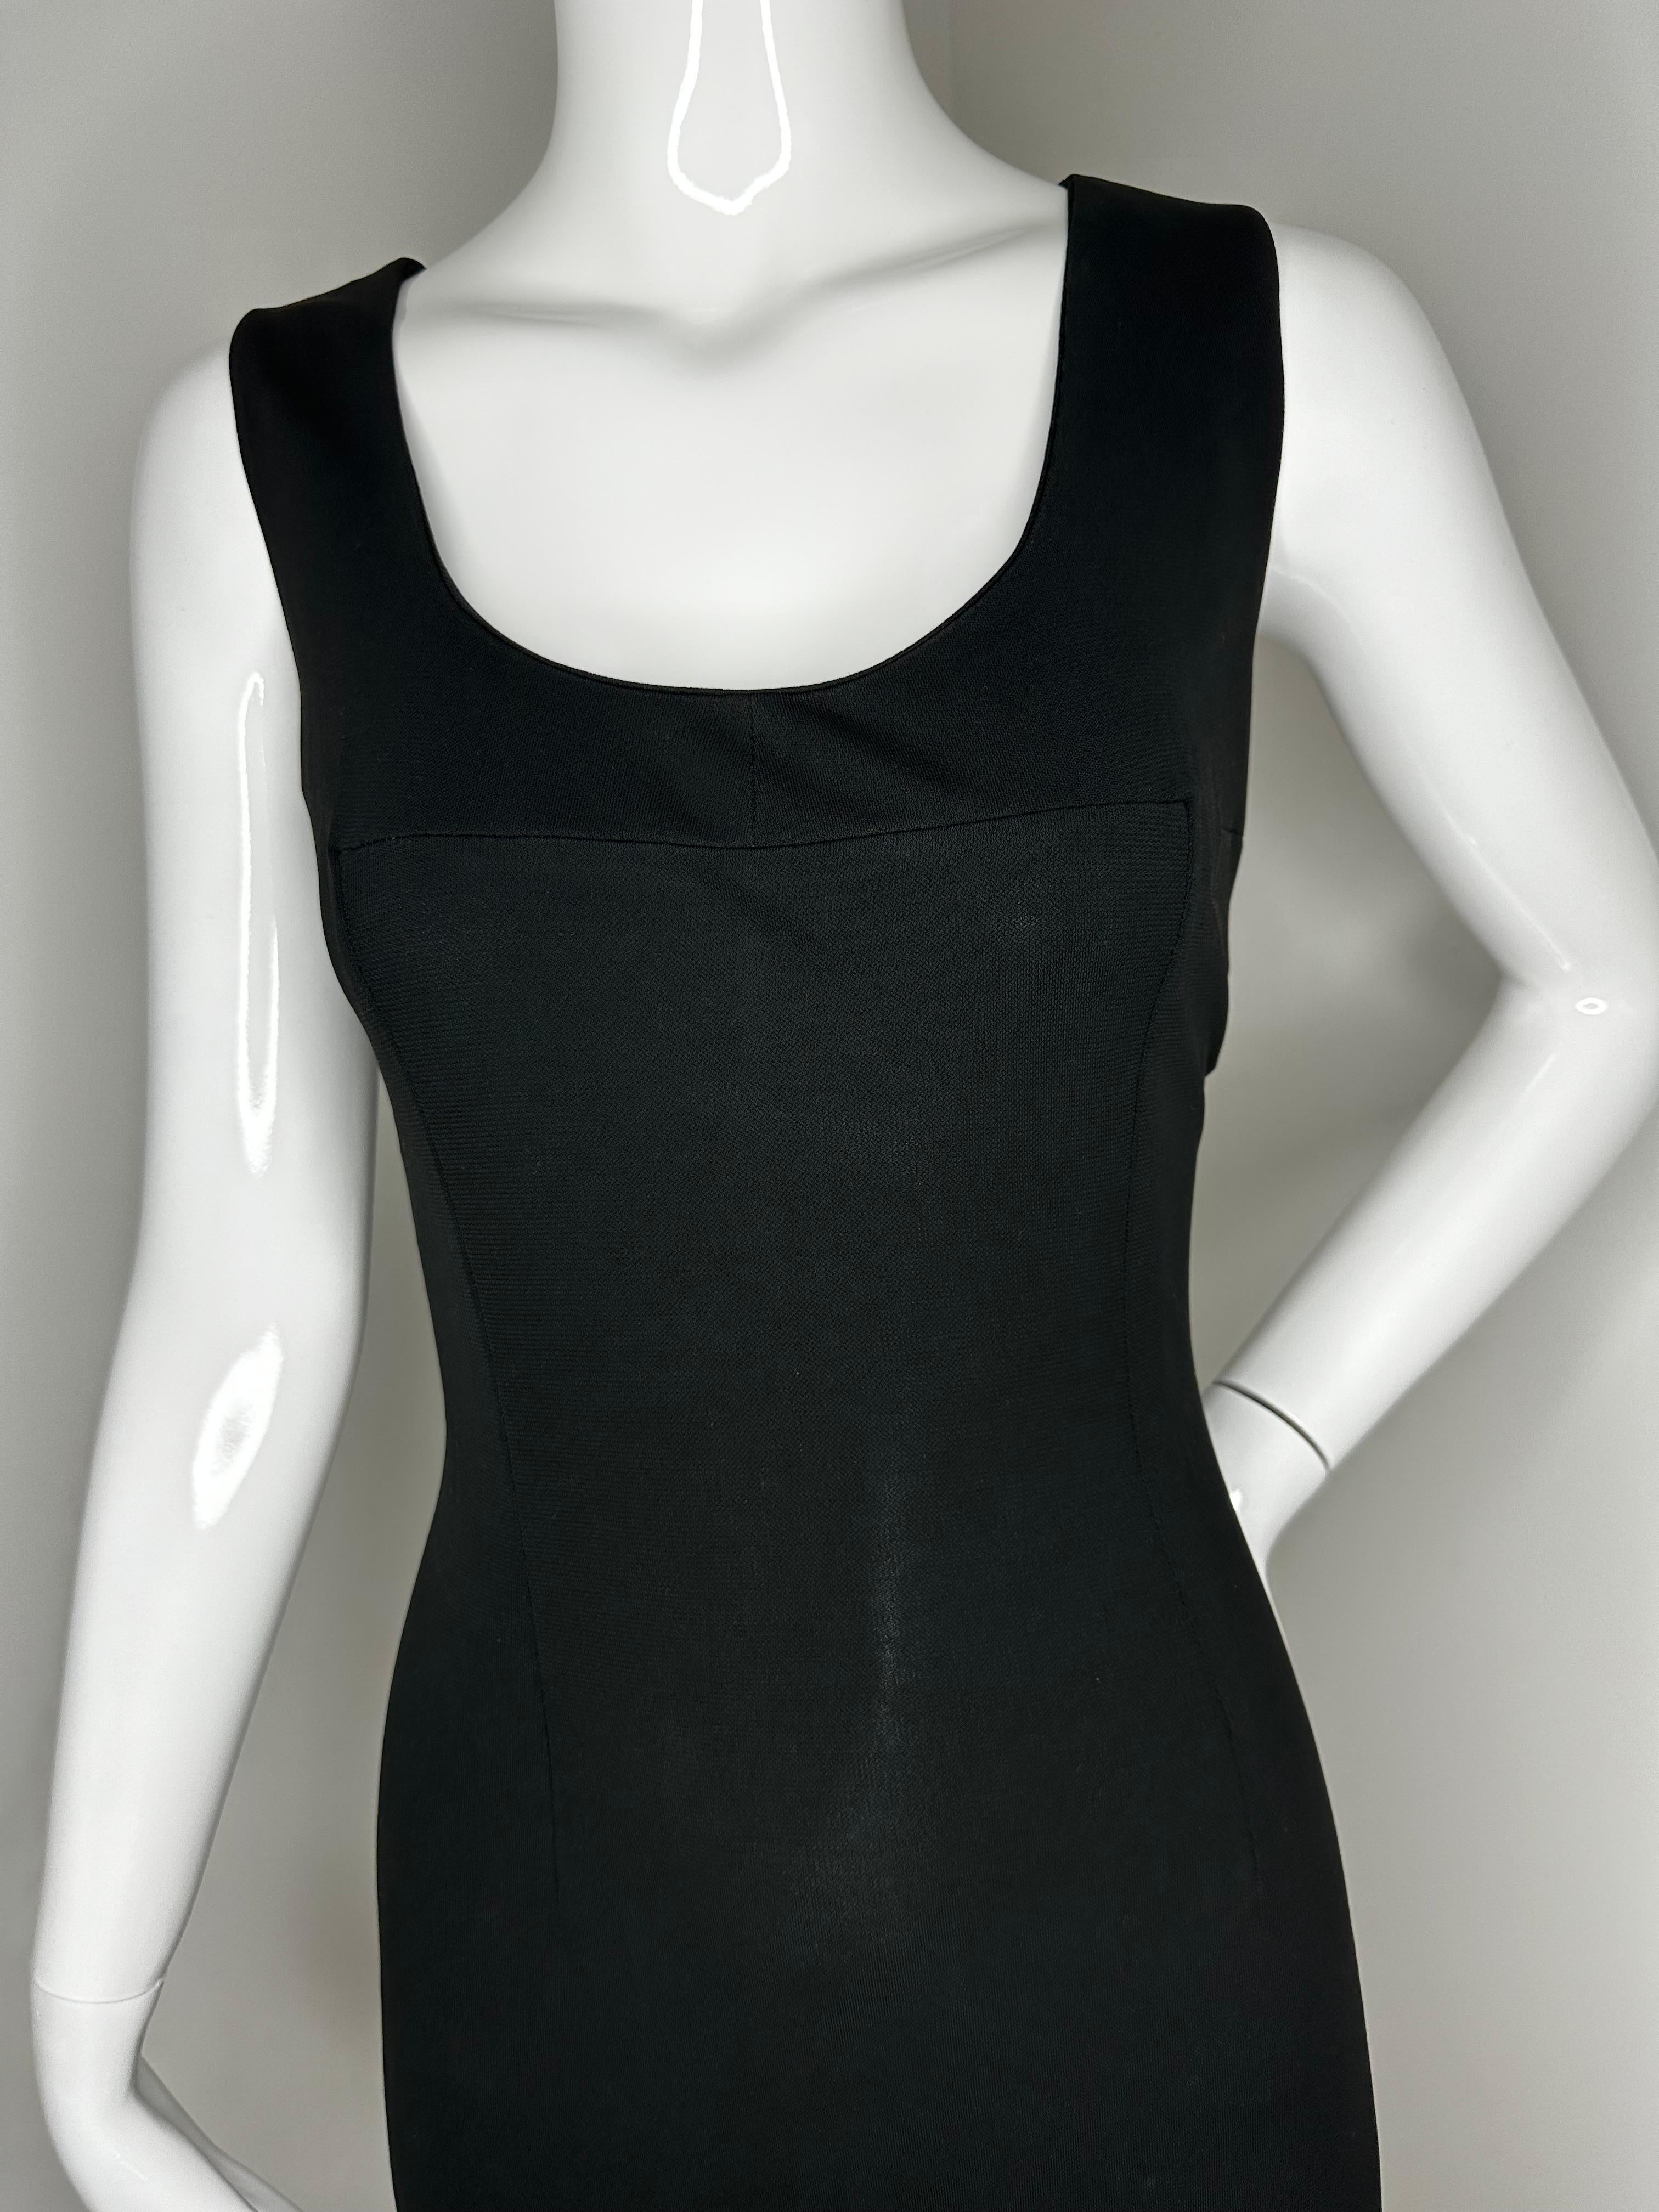 Dolce Gabbana S/S 1996 runway black mini dress with slits 

One side has a deeper slit than the other 
Stretchy, soft fabric 
Size 42 
Total length approx. 34 inches 

Good vintage condition, no rips or stains 
Normal overall wear consistent with age